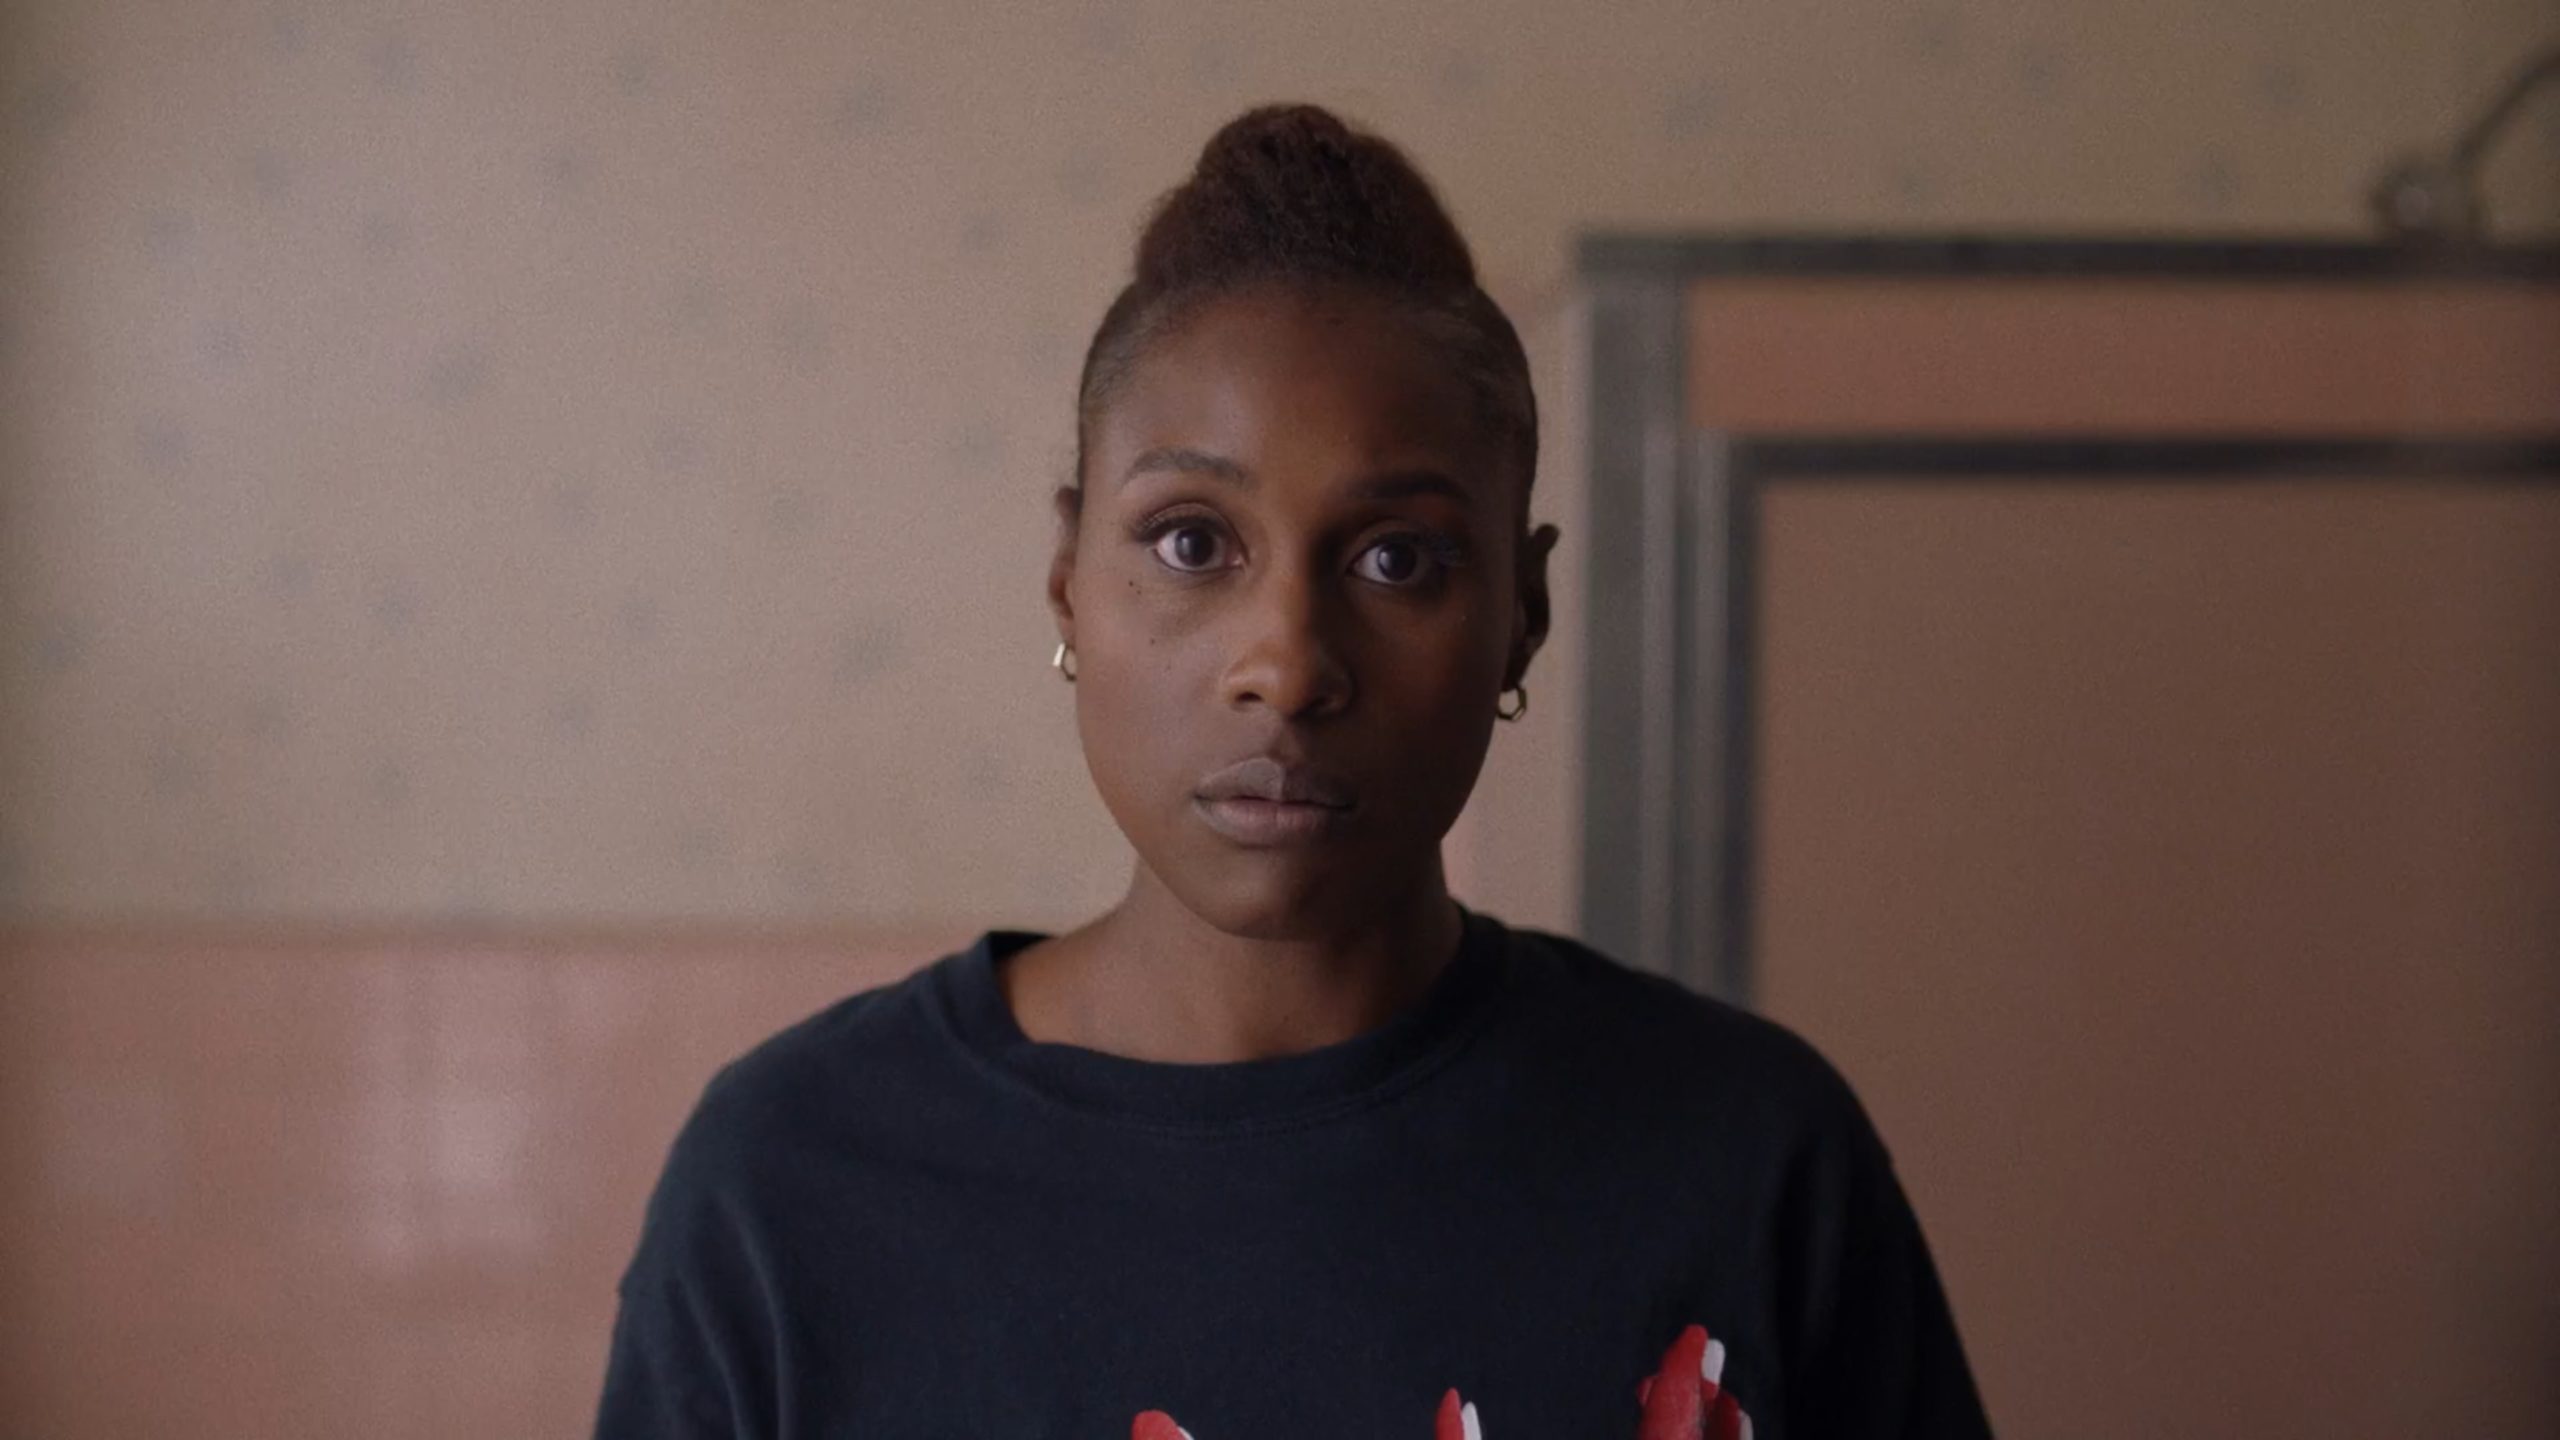 Issa-Insecure-Season-4-Episode-4-“Lowkey-Losin’-It”-–-HBO-2-scaled